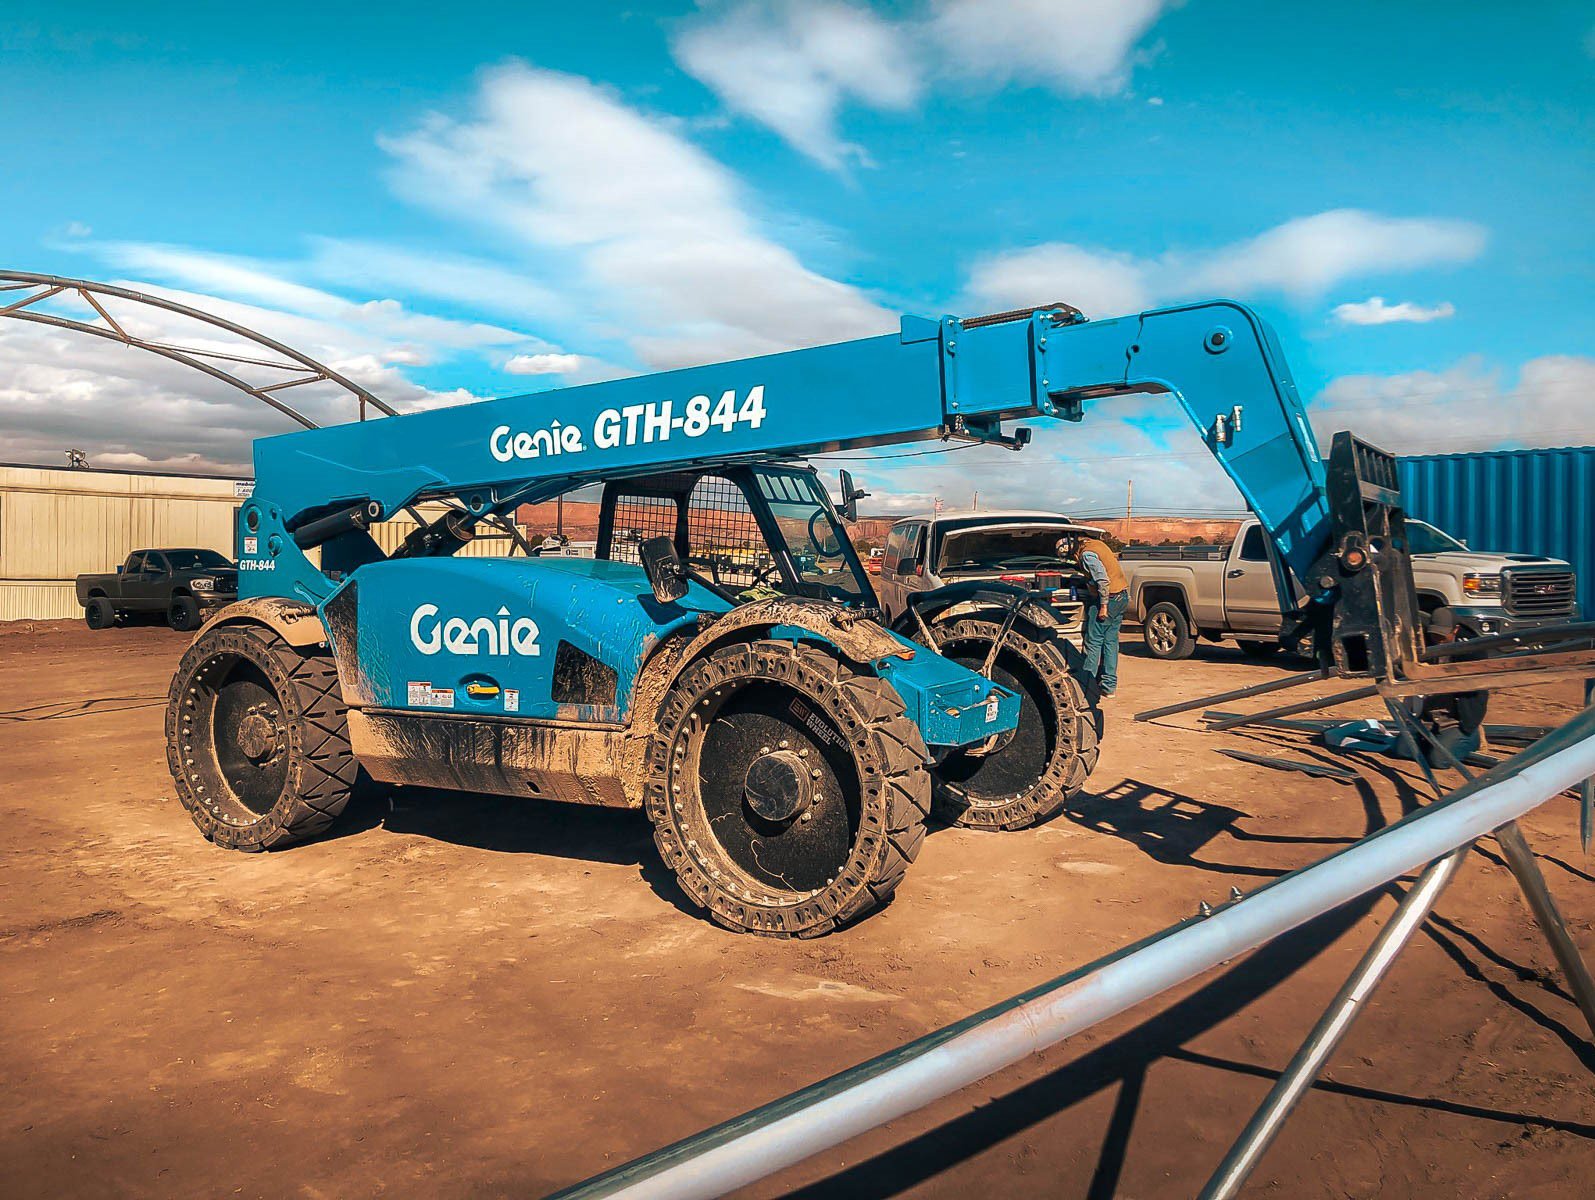 This picture shows our Xtreme telehandler tires on a blue Genie telehandler